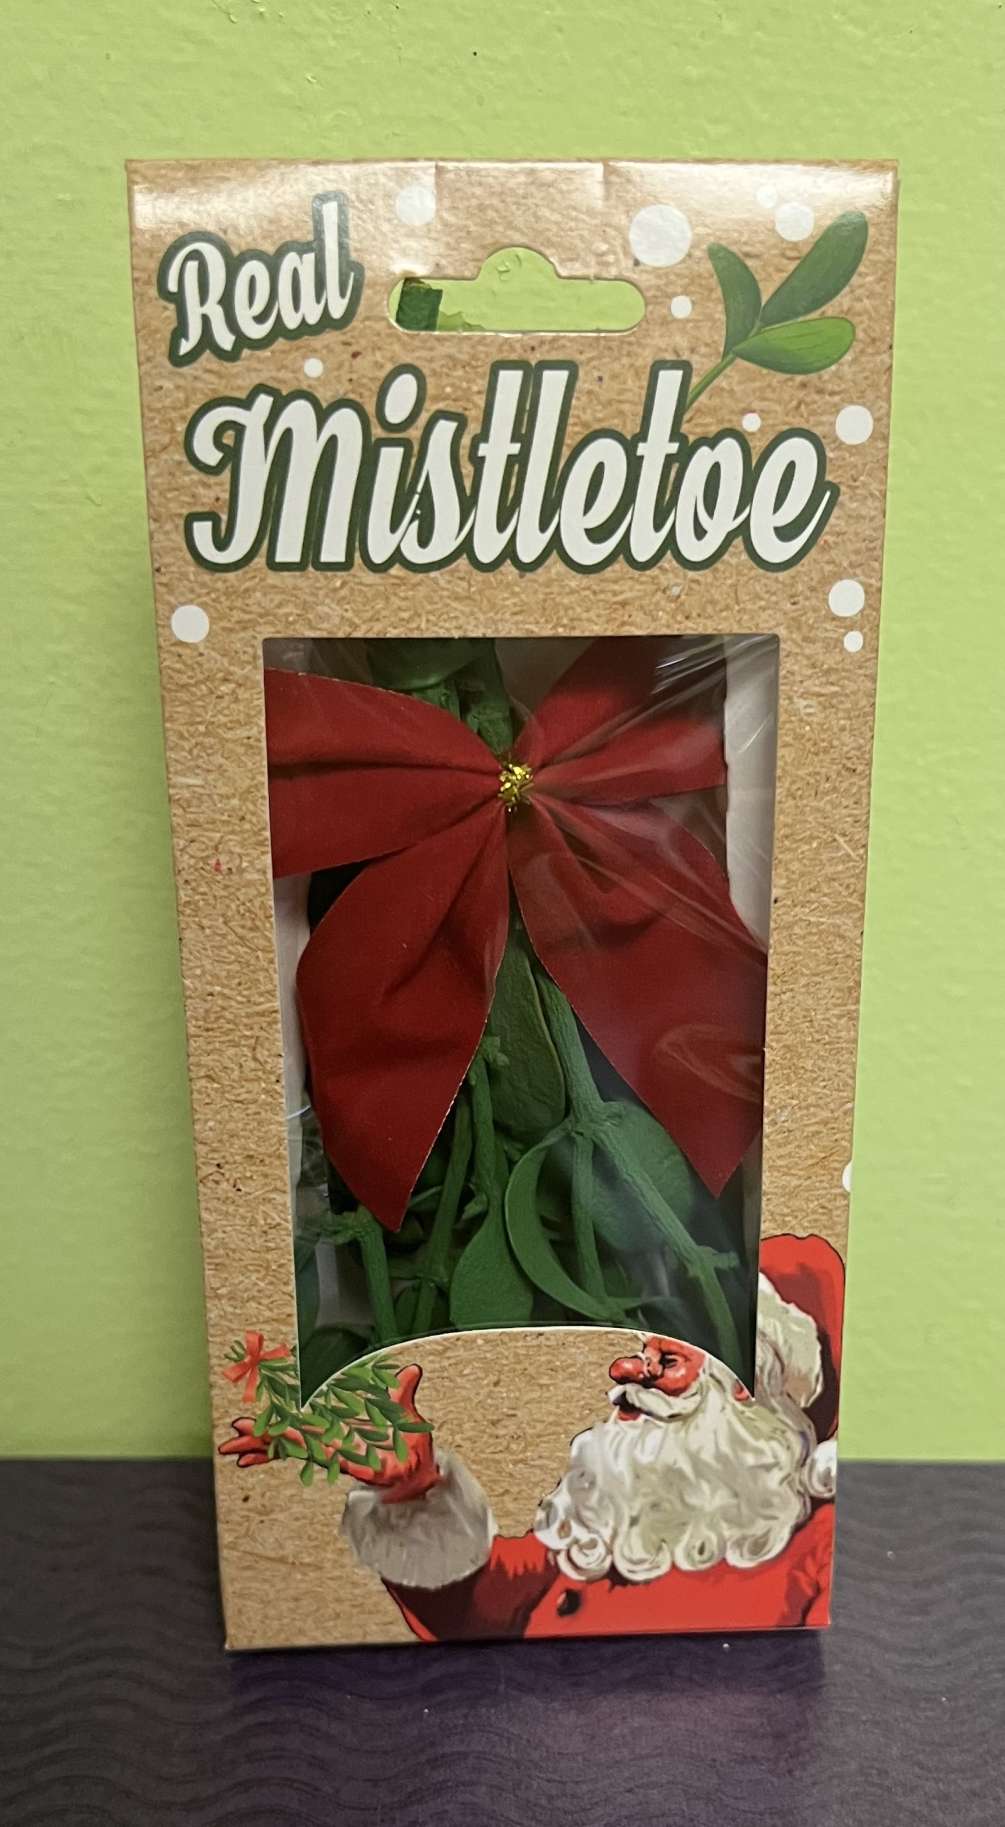 Hanging mistletoe is a sign of good will and to steal a